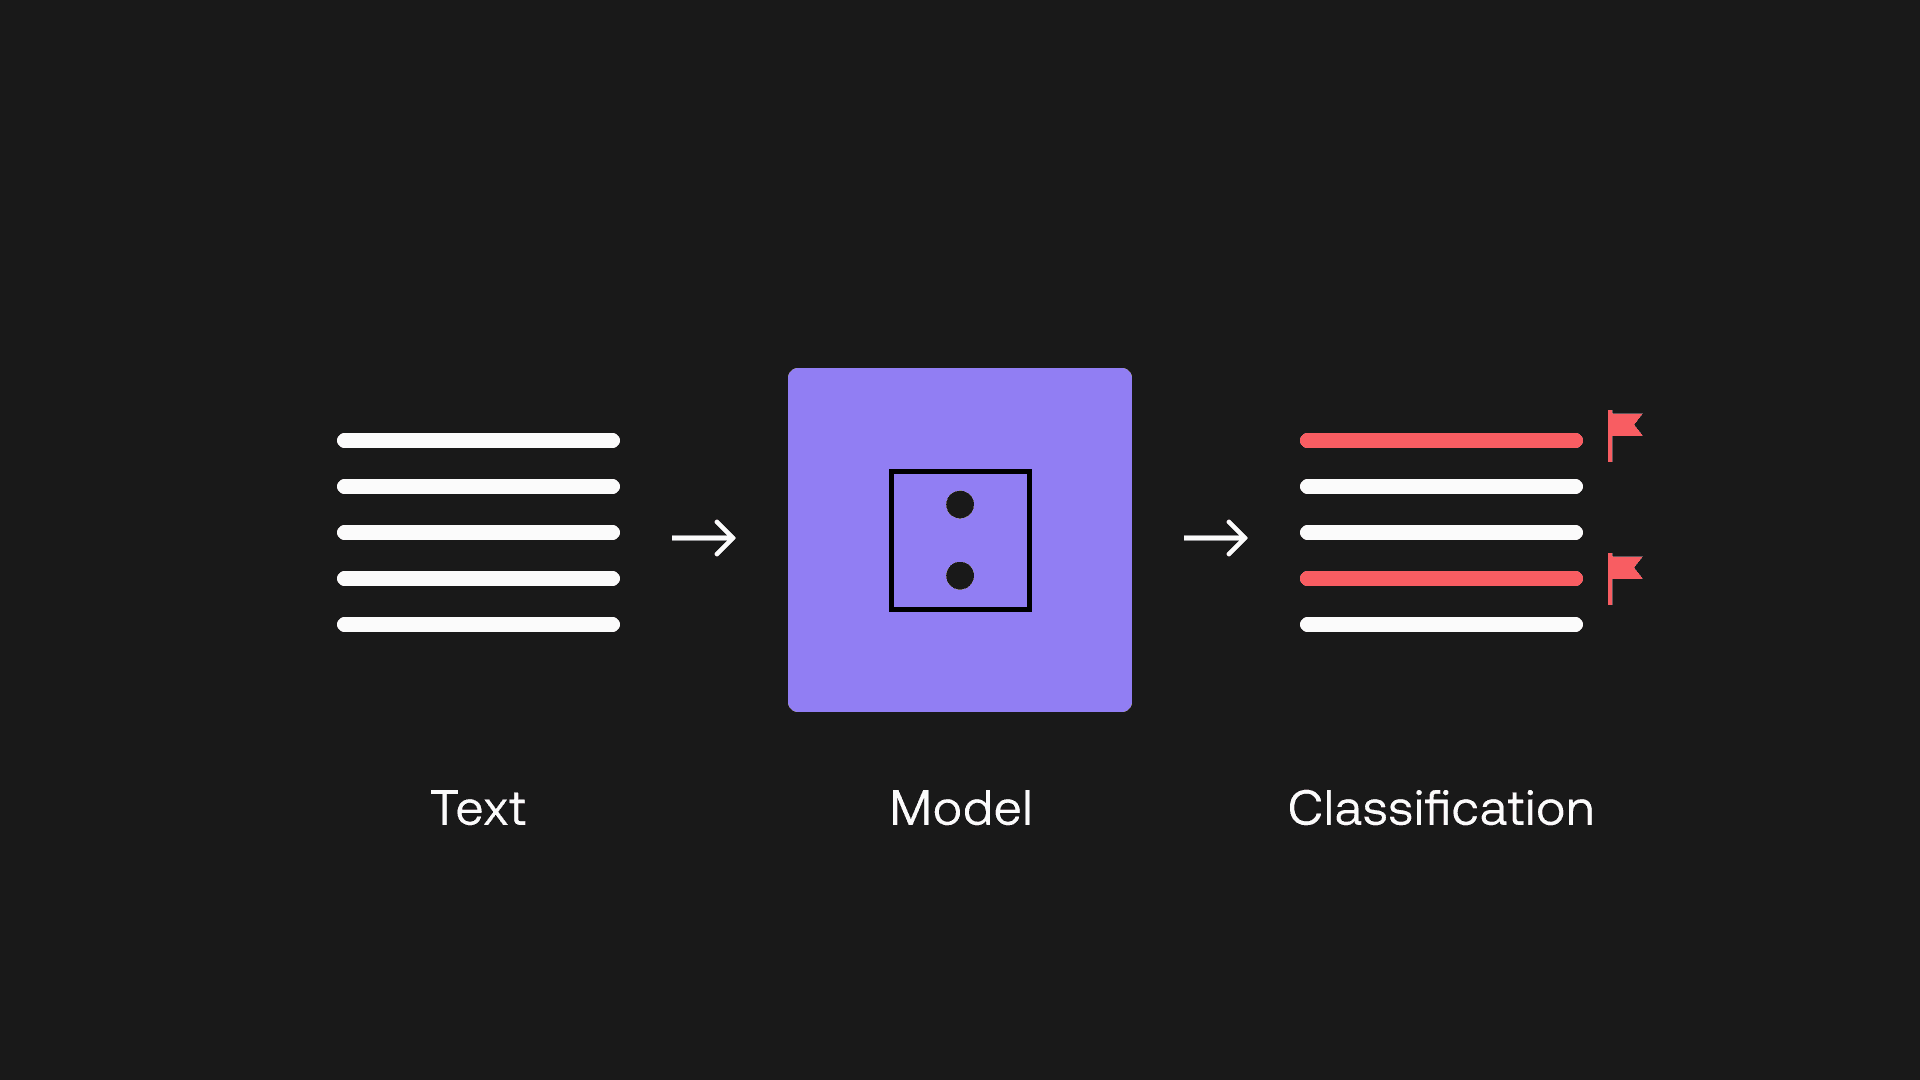 Content Moderation with the Classify API